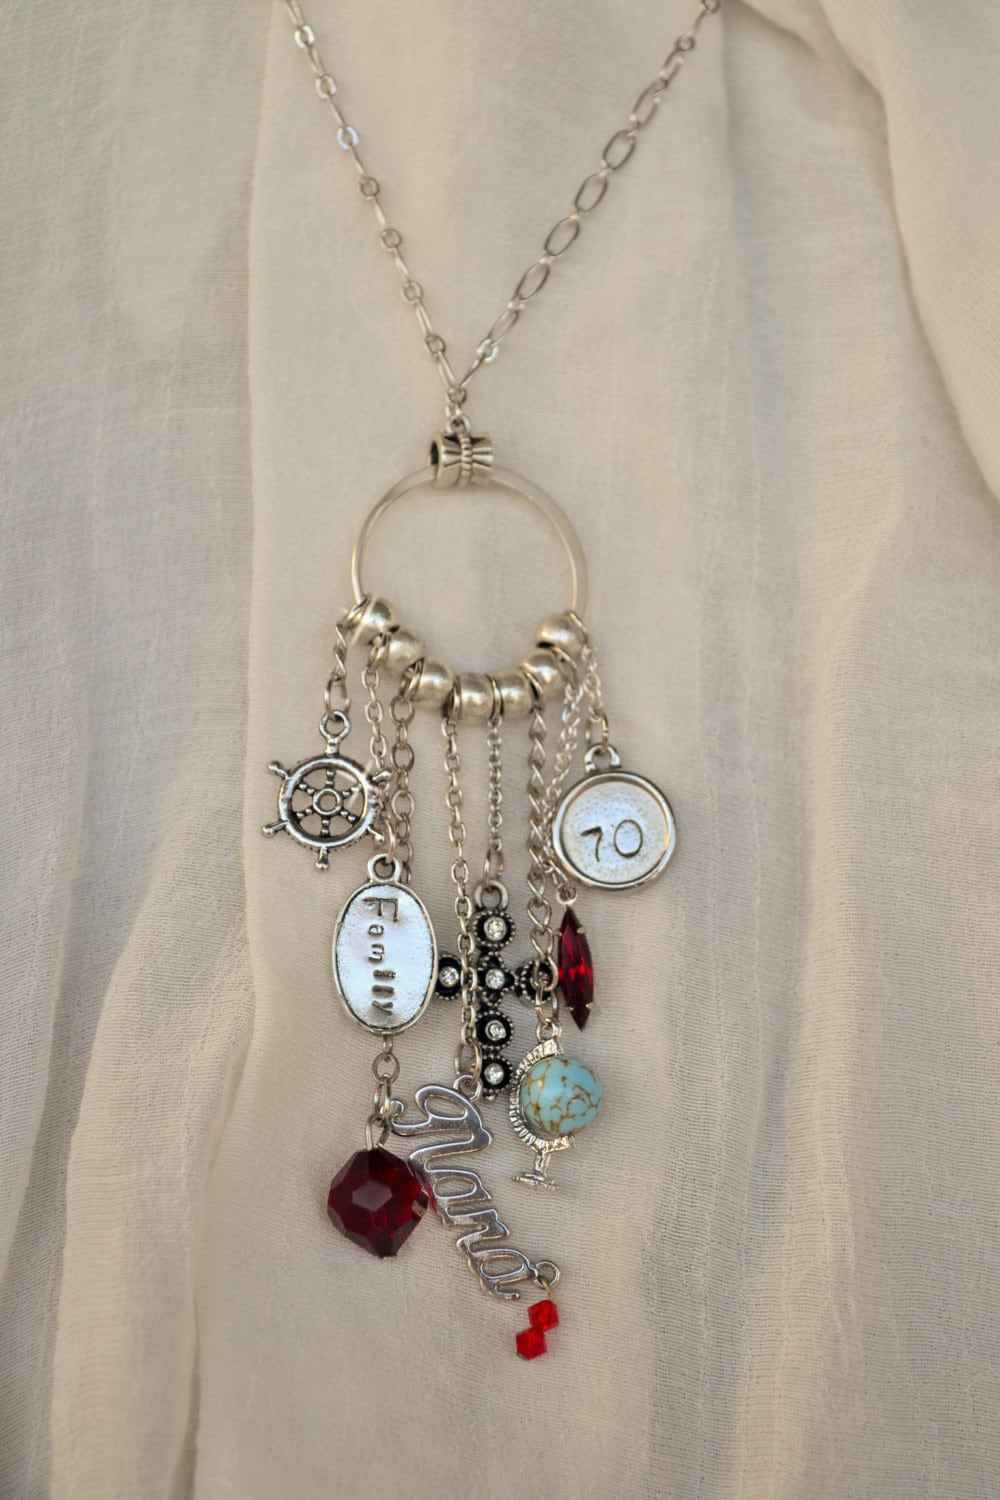 70th Birthday Charm Necklace Vintage Assemblage Customized - Etsy